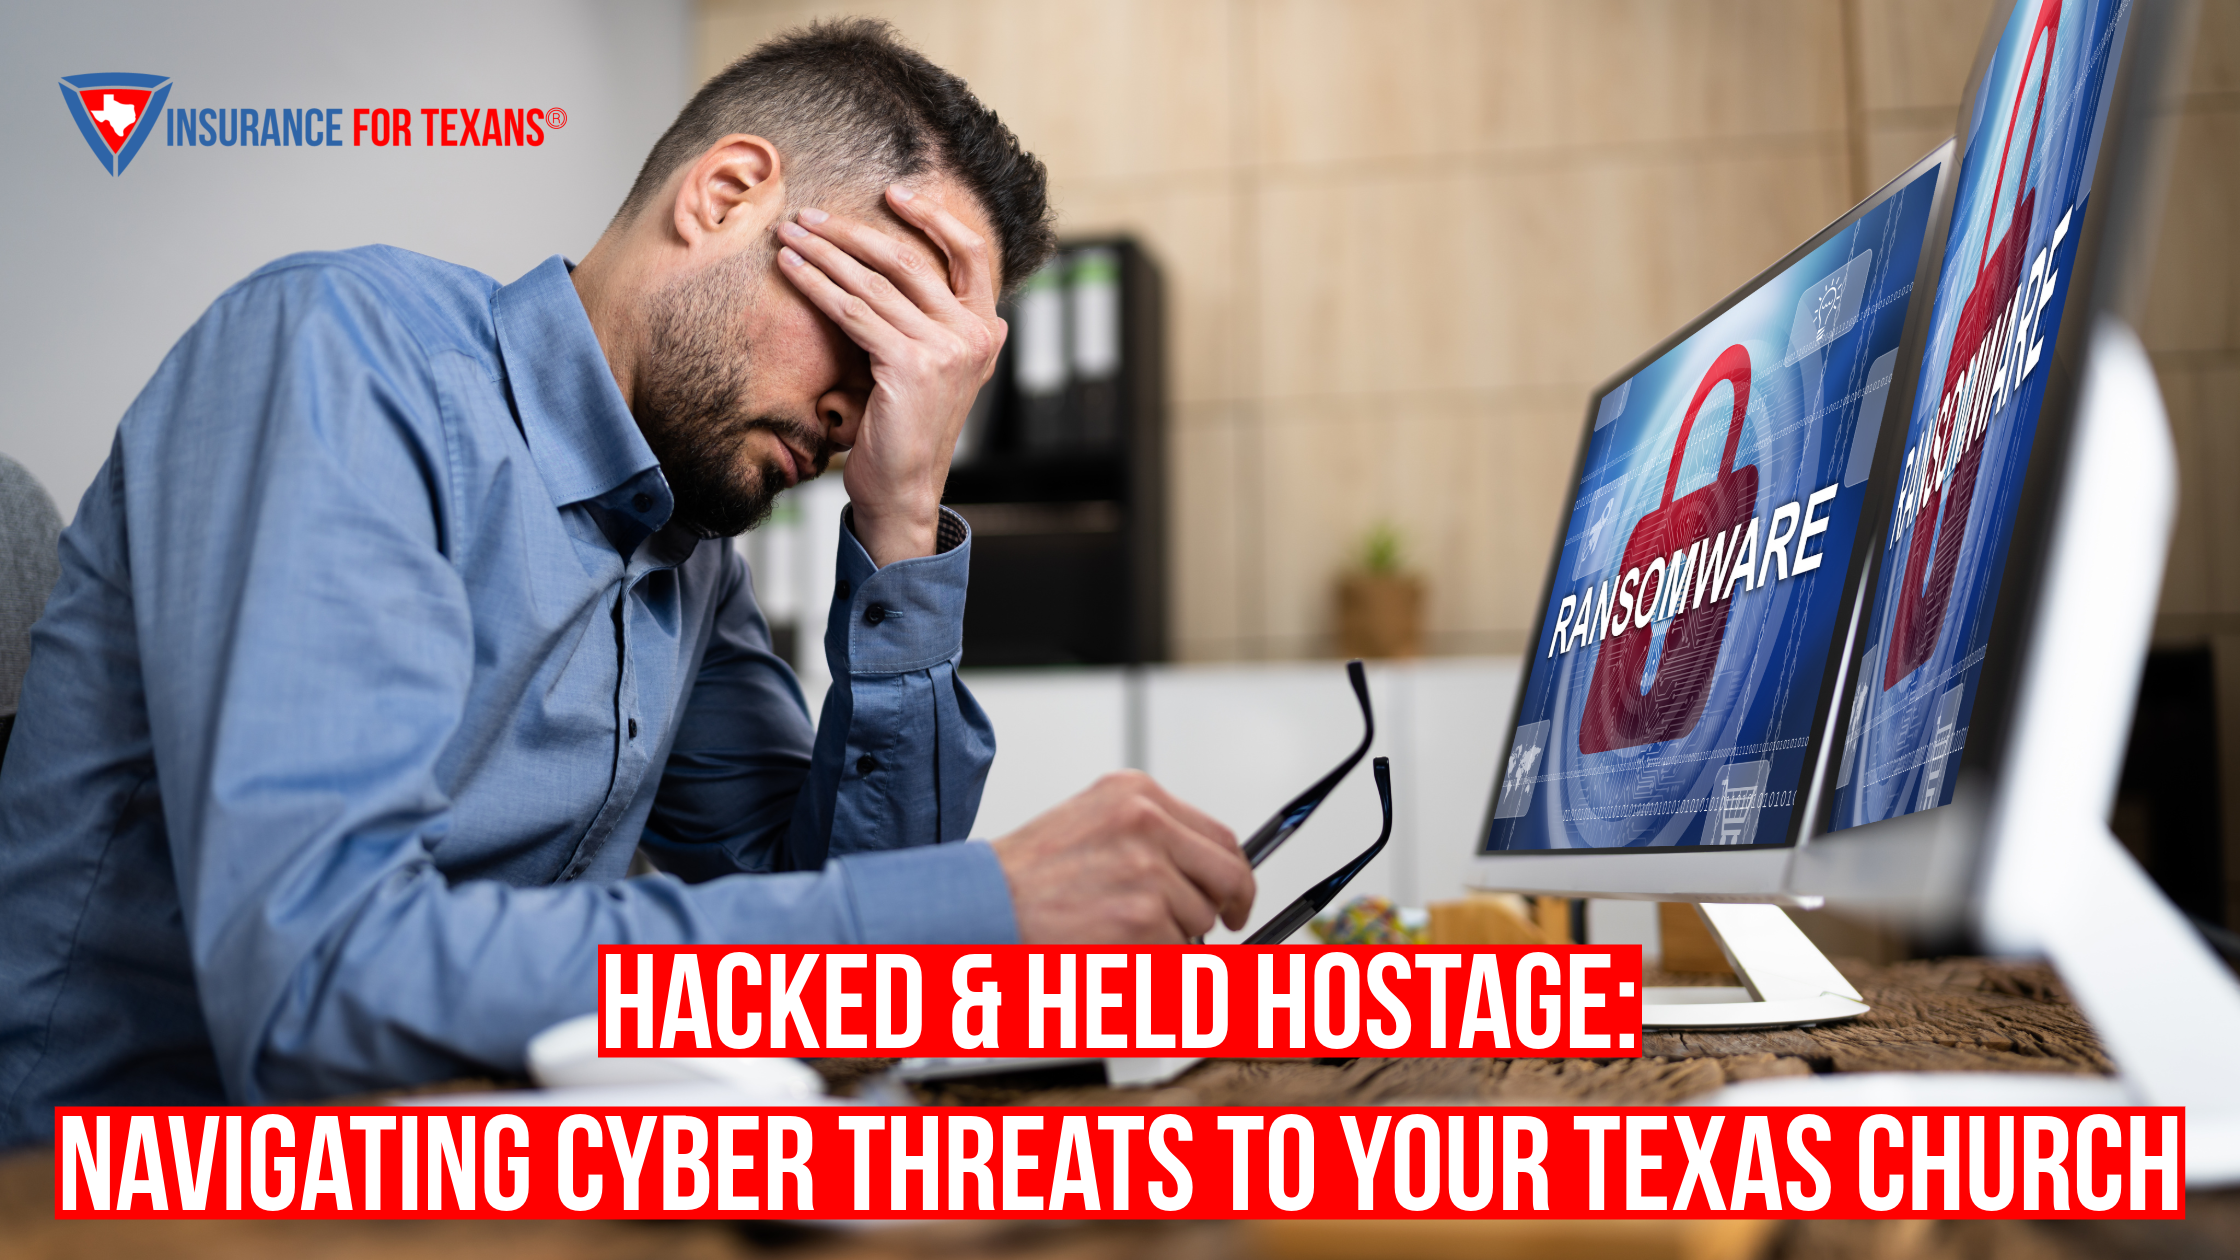 Hacked & Held Hostage: Navigating Cyber Threats to Your Texas Church